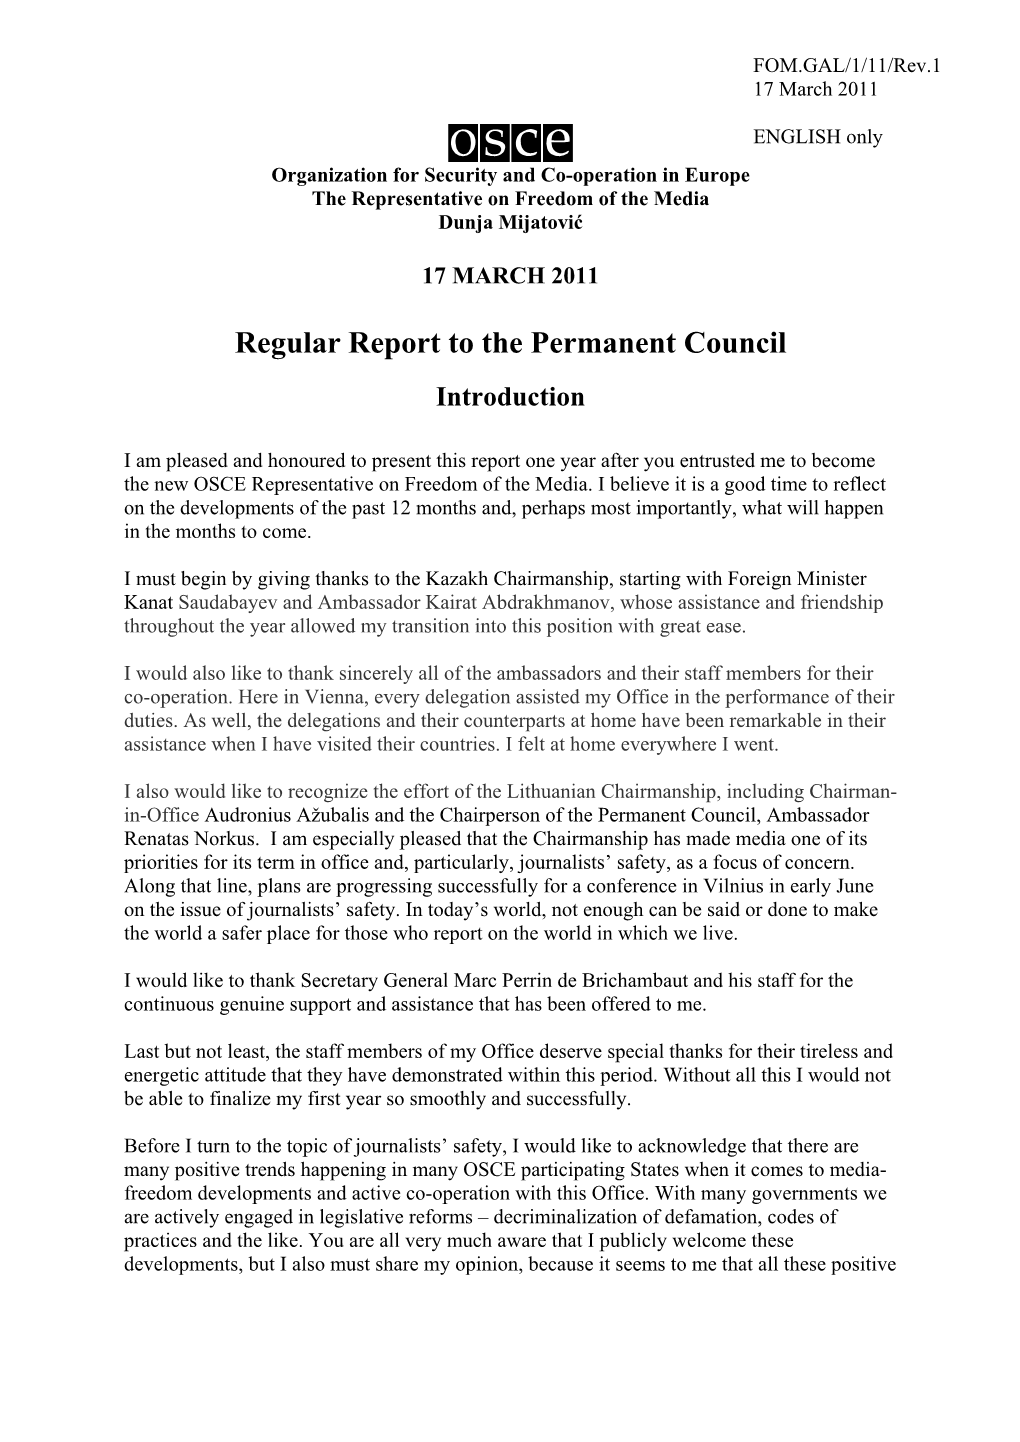 Regular Report to the Permanent Council Introduction